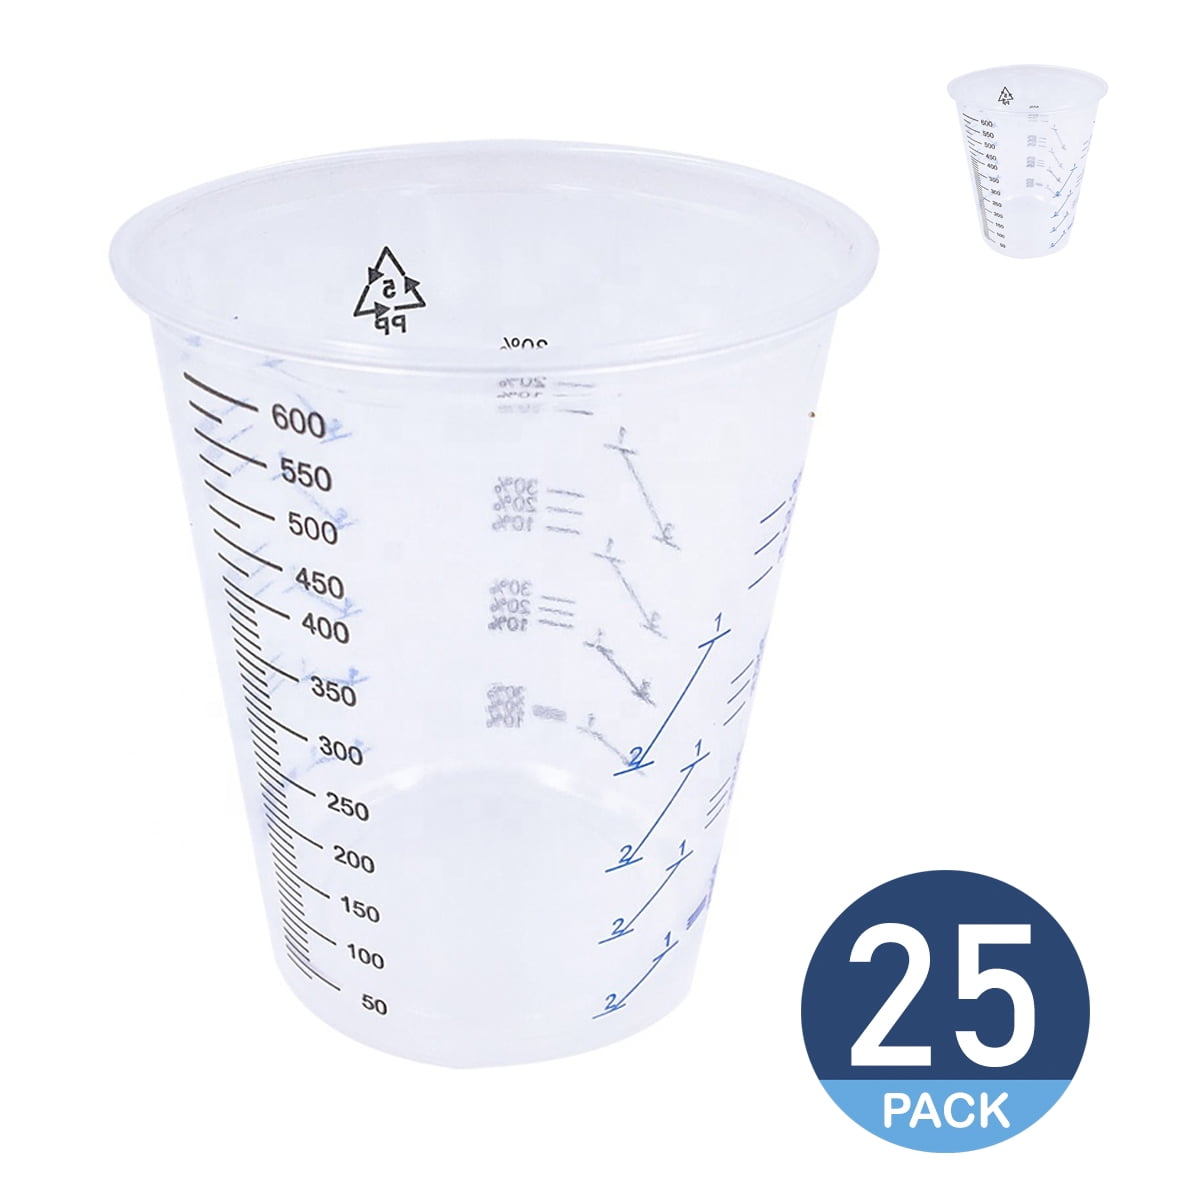 NUOBESTY 60ml Scale Cups 40Pcs Shatterproof Graduated Mixing Cups Plastic Cups Professional CTransparent Scale Cups Clear Graduated Cups Measuring Cup Lab Supply for Home School 